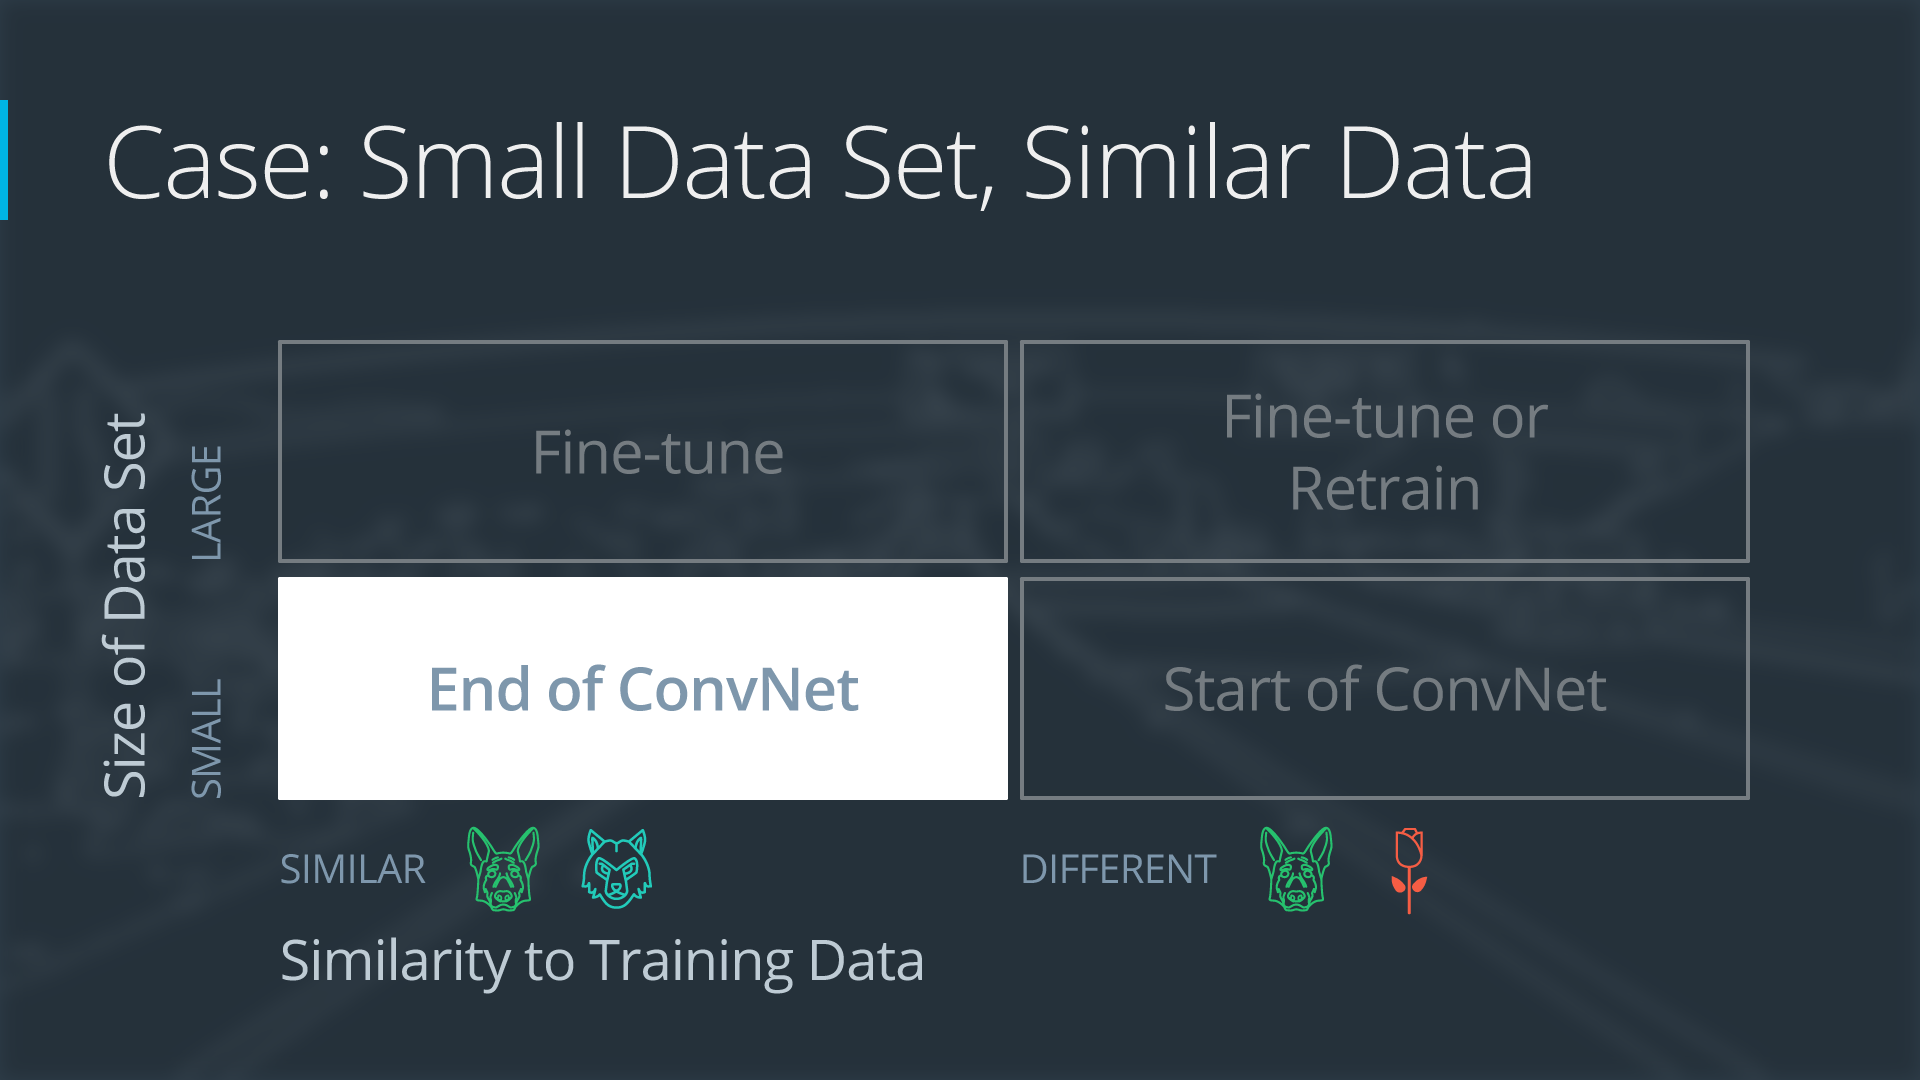 Case 1: Small Data Set with Similar Data